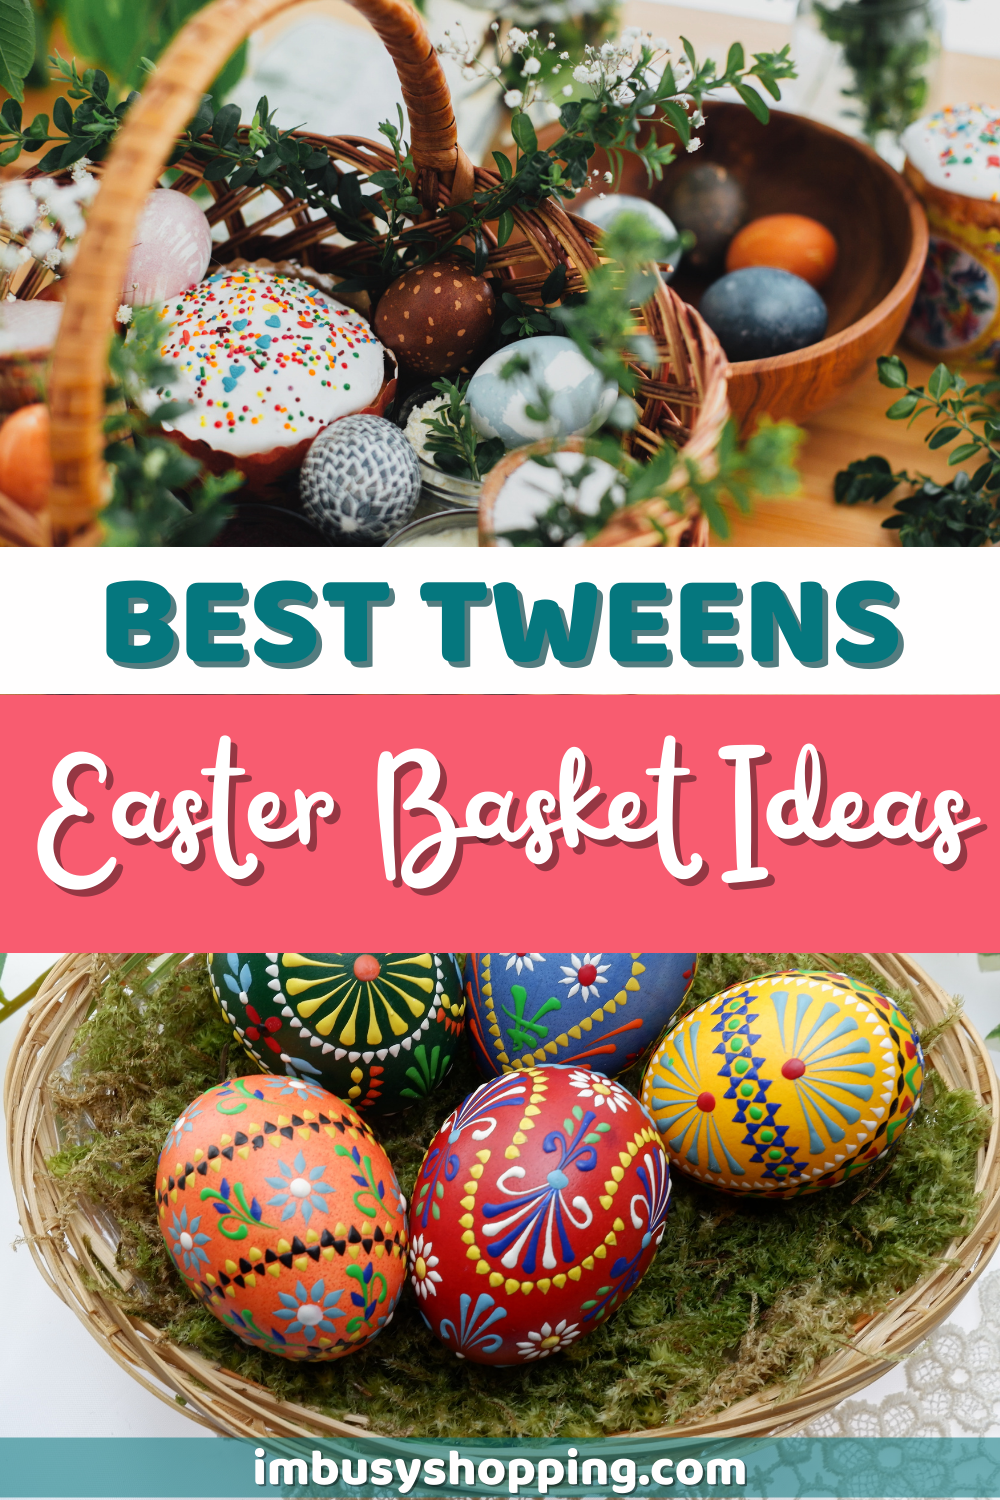 Pin image with wooden basket containing colorful eggs with patterns